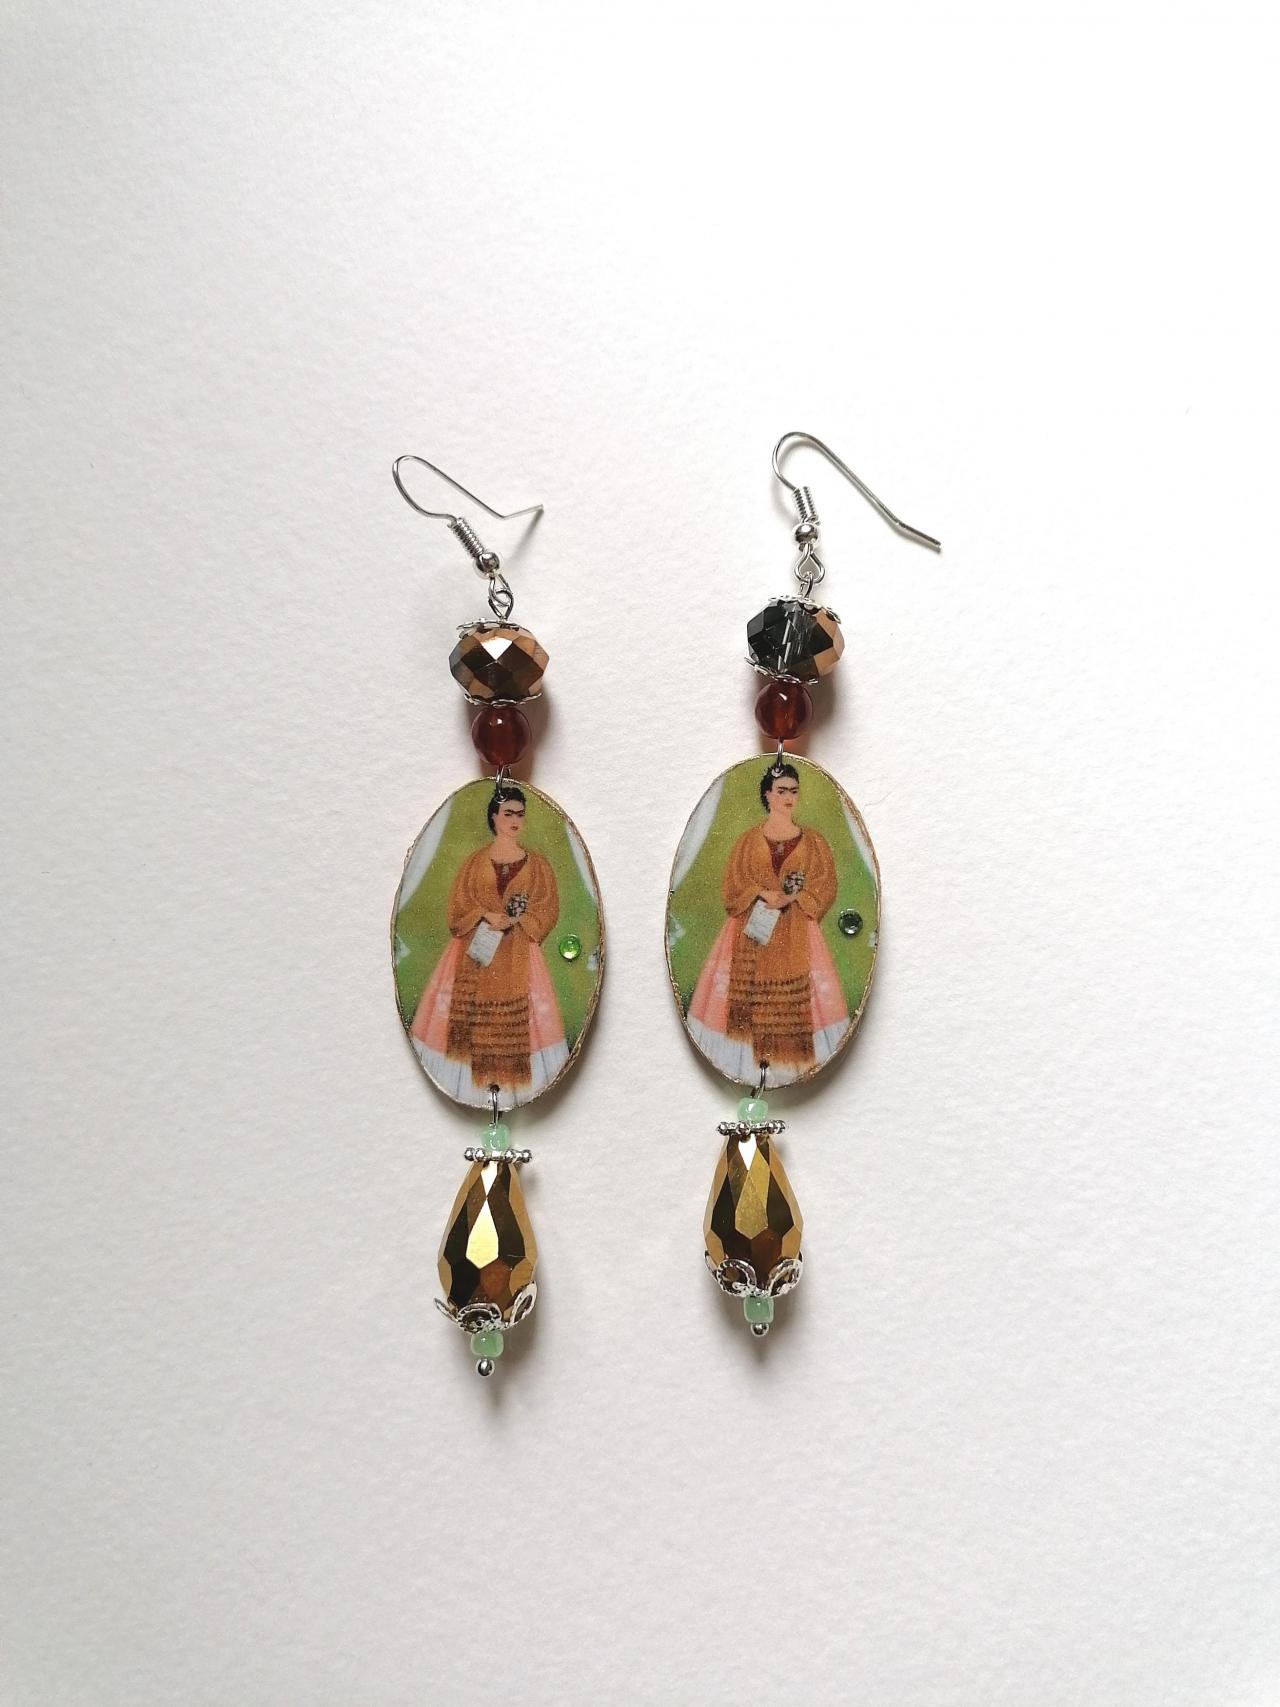 Frida Boutique Capsule Collection - "between The Curtains" Earrings Ii